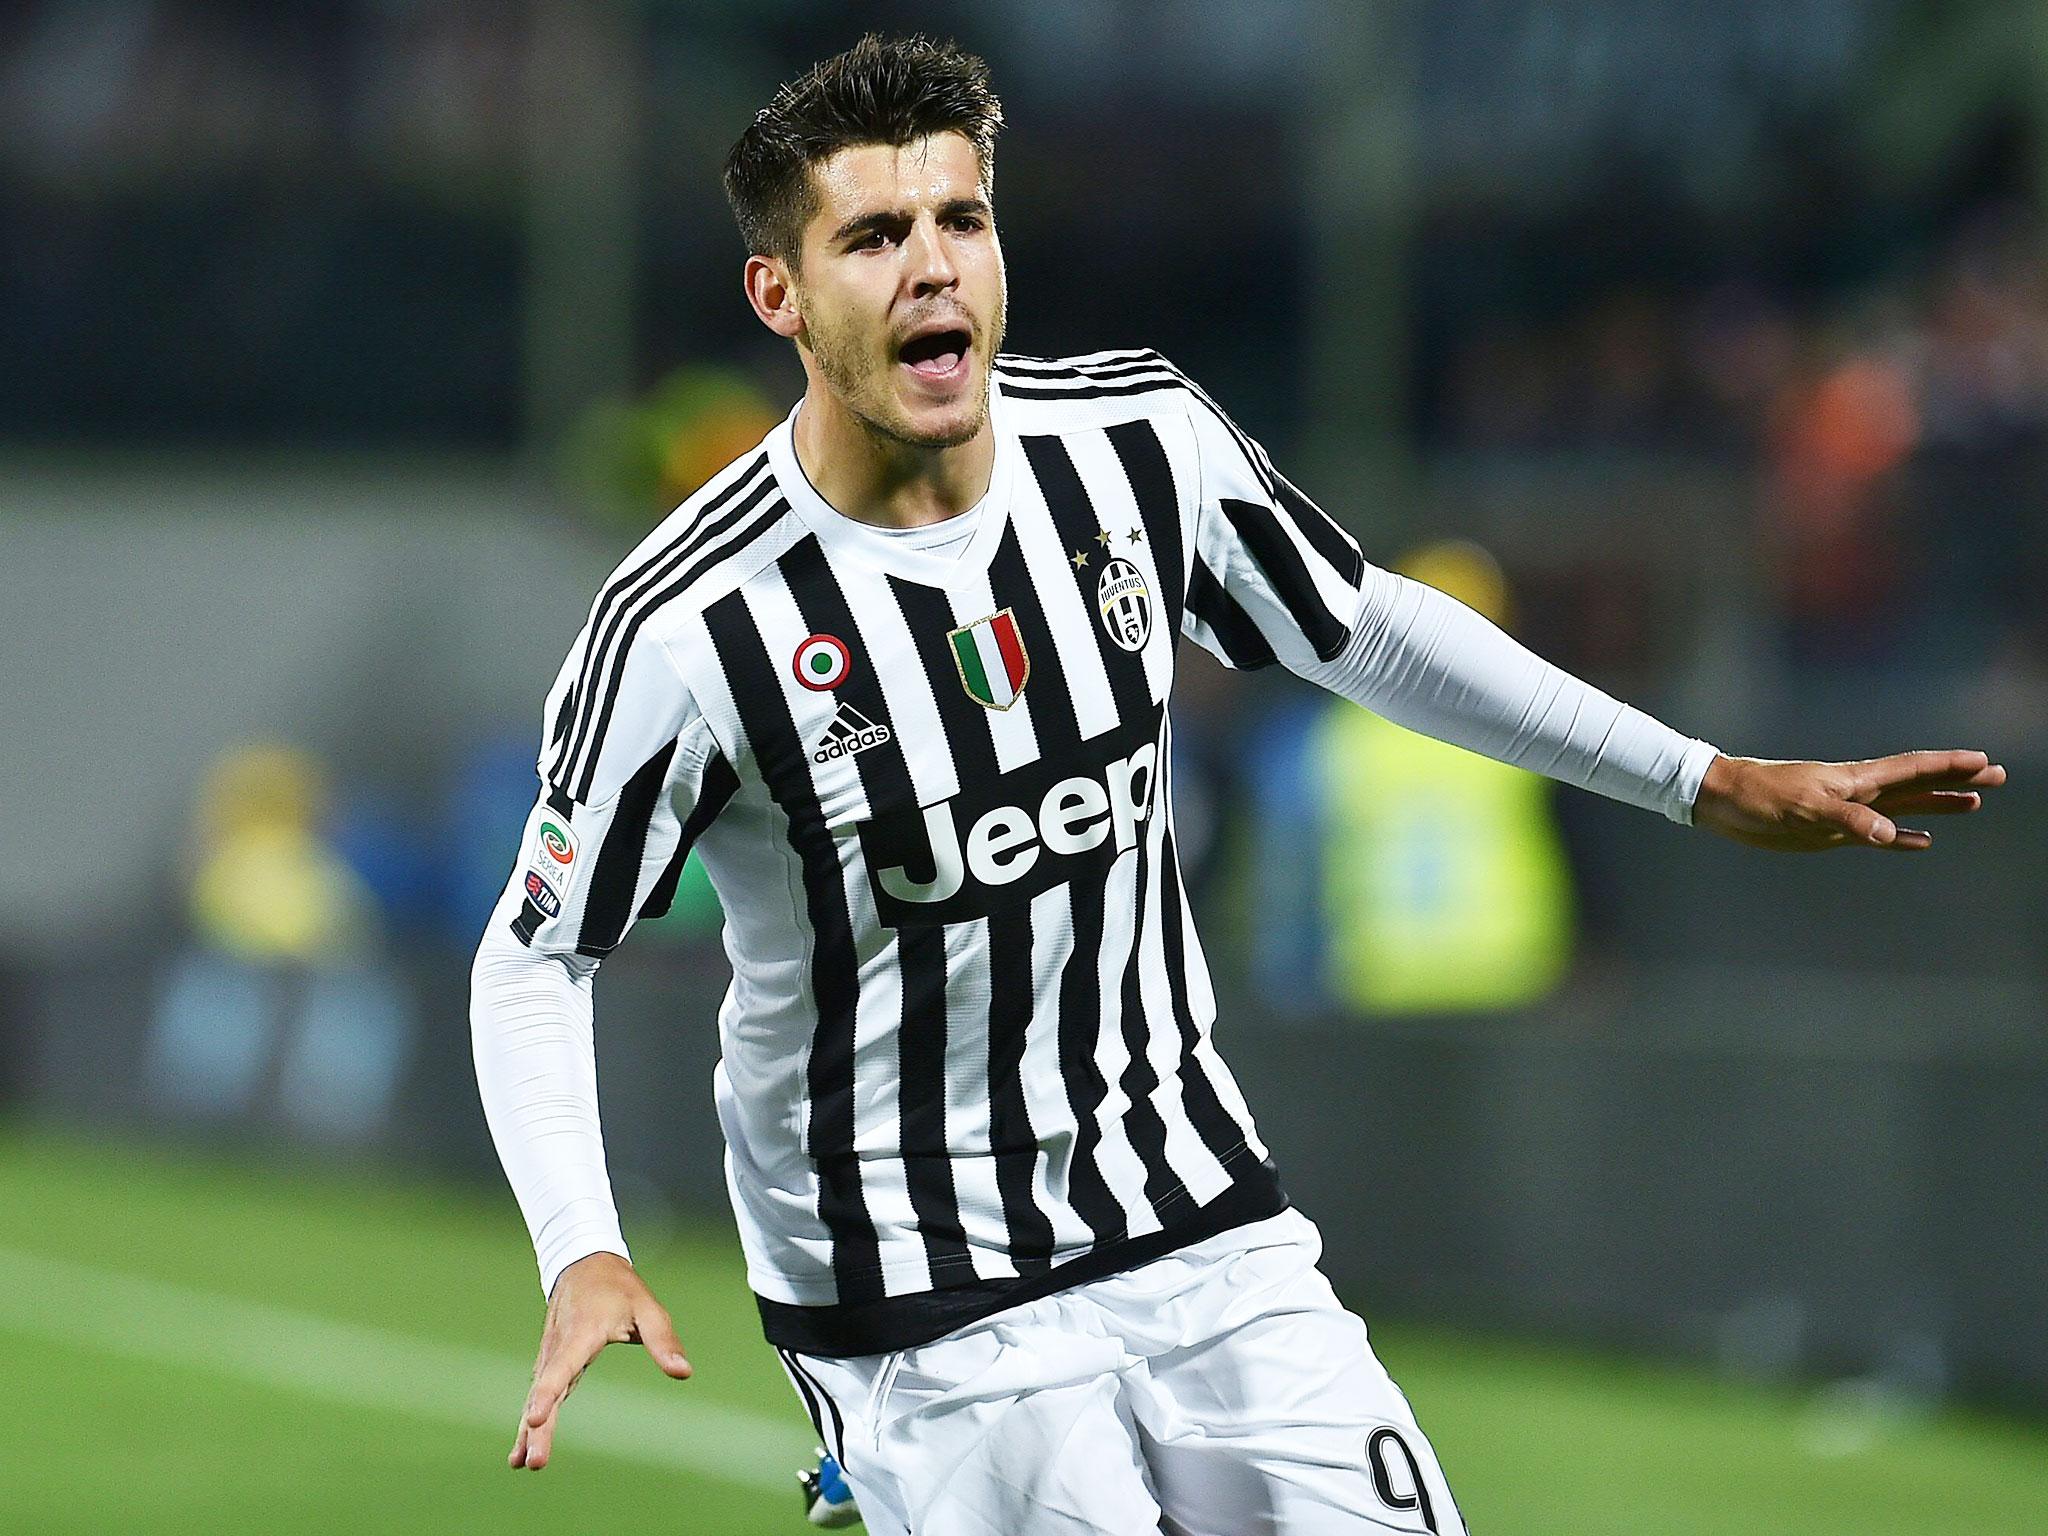 Juventus are set to try and bring Morata back from Chelsea